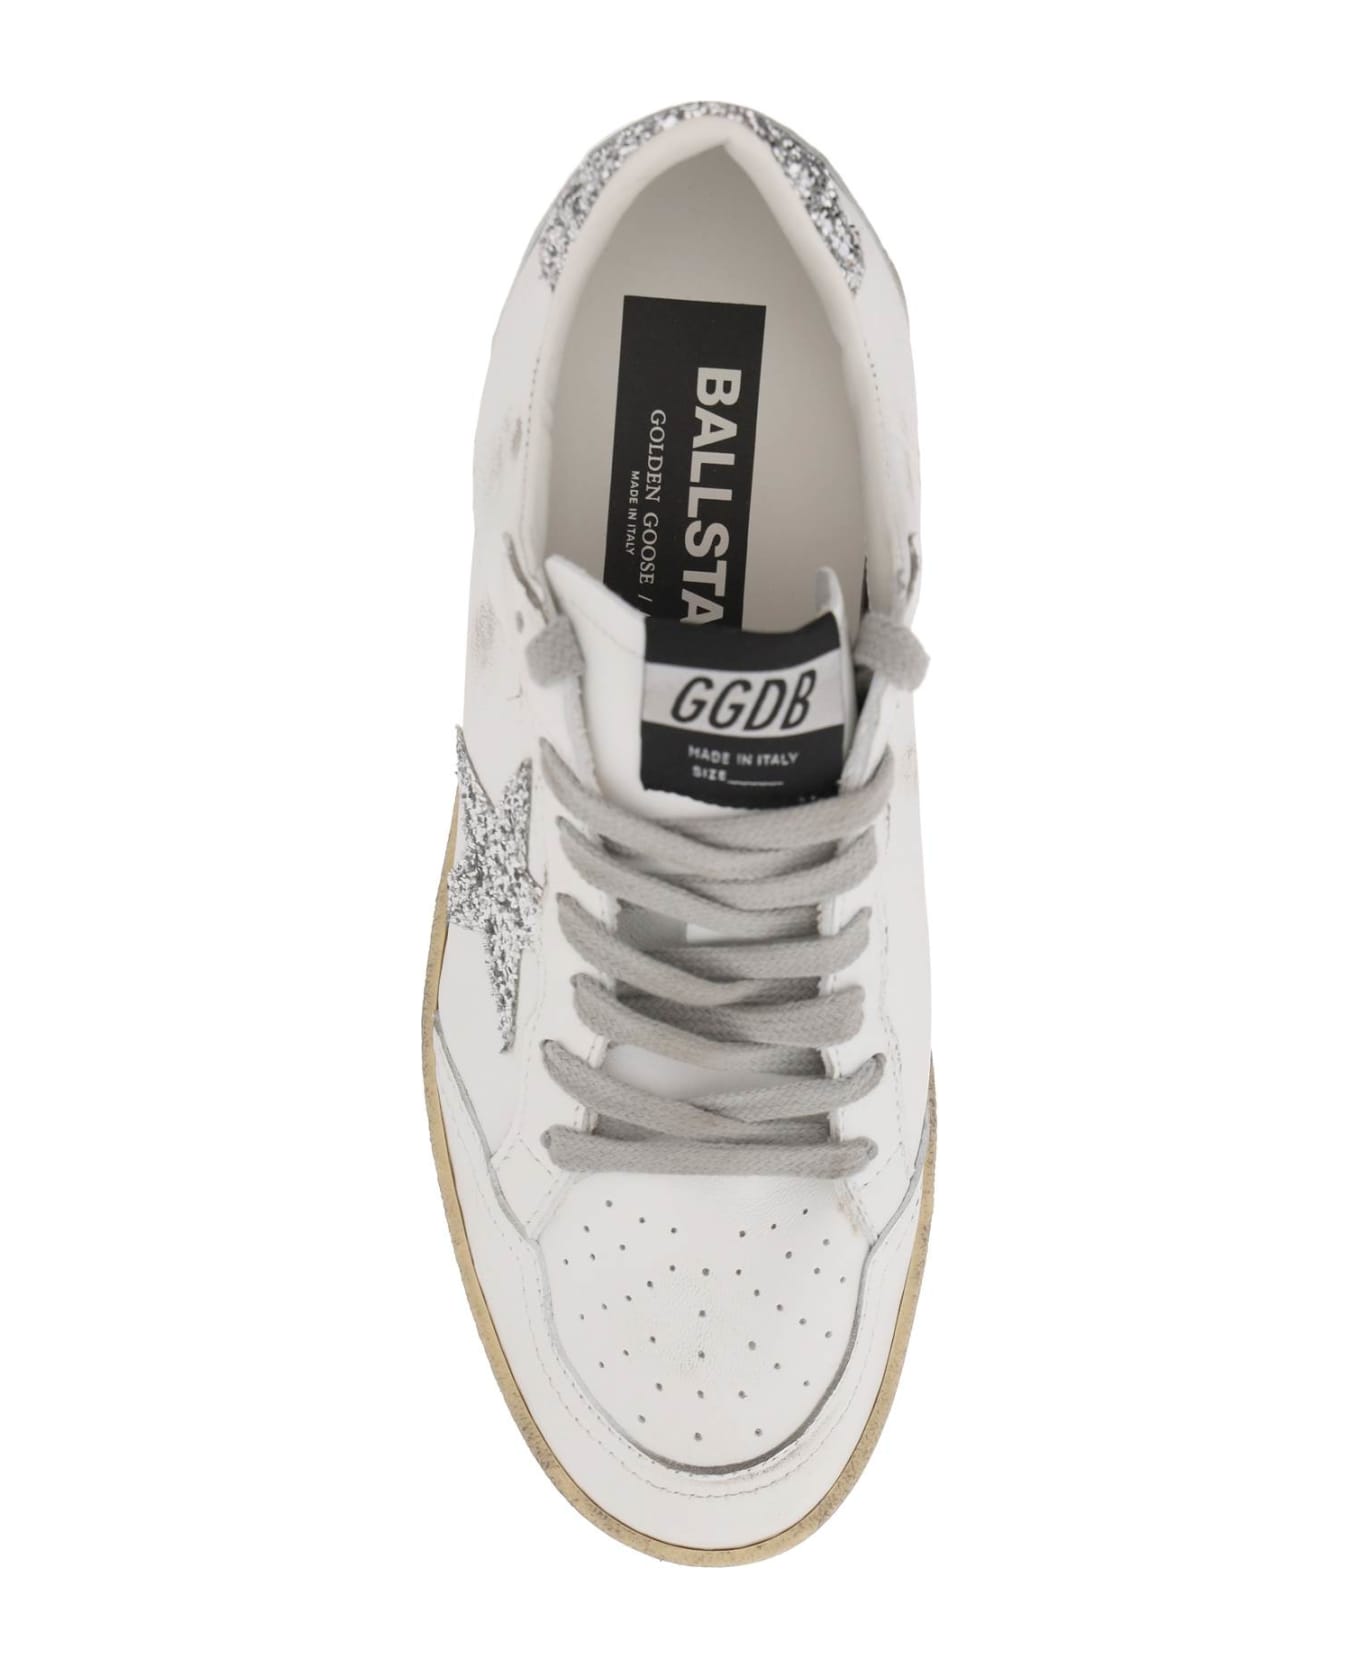 Golden Goose Leather Ball Star Sneakers - WHITE SILVER (White)